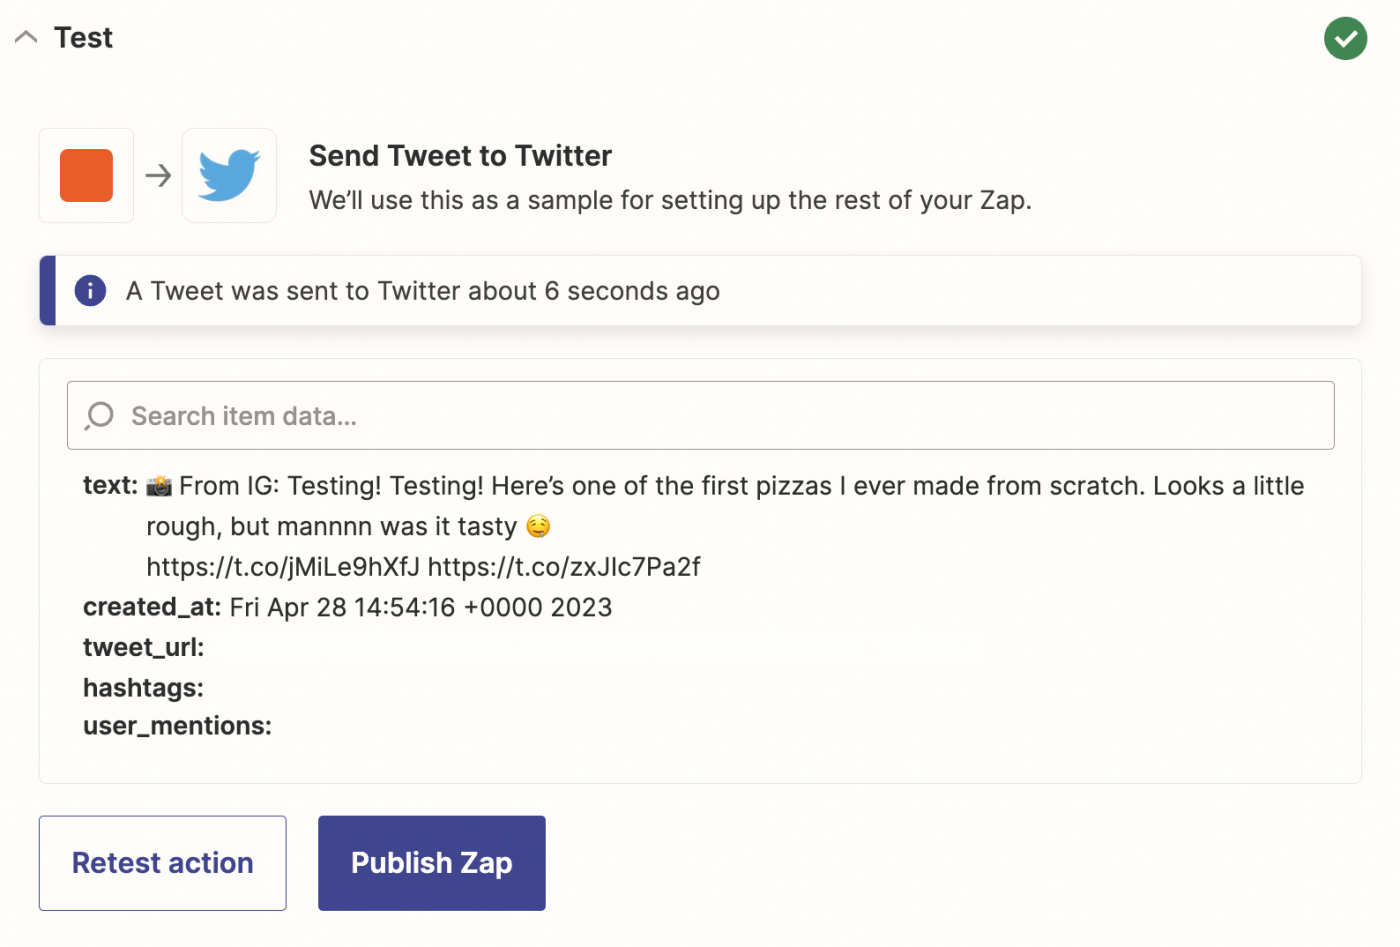 Screenshot of a successful Twitter action step test in Zapier.